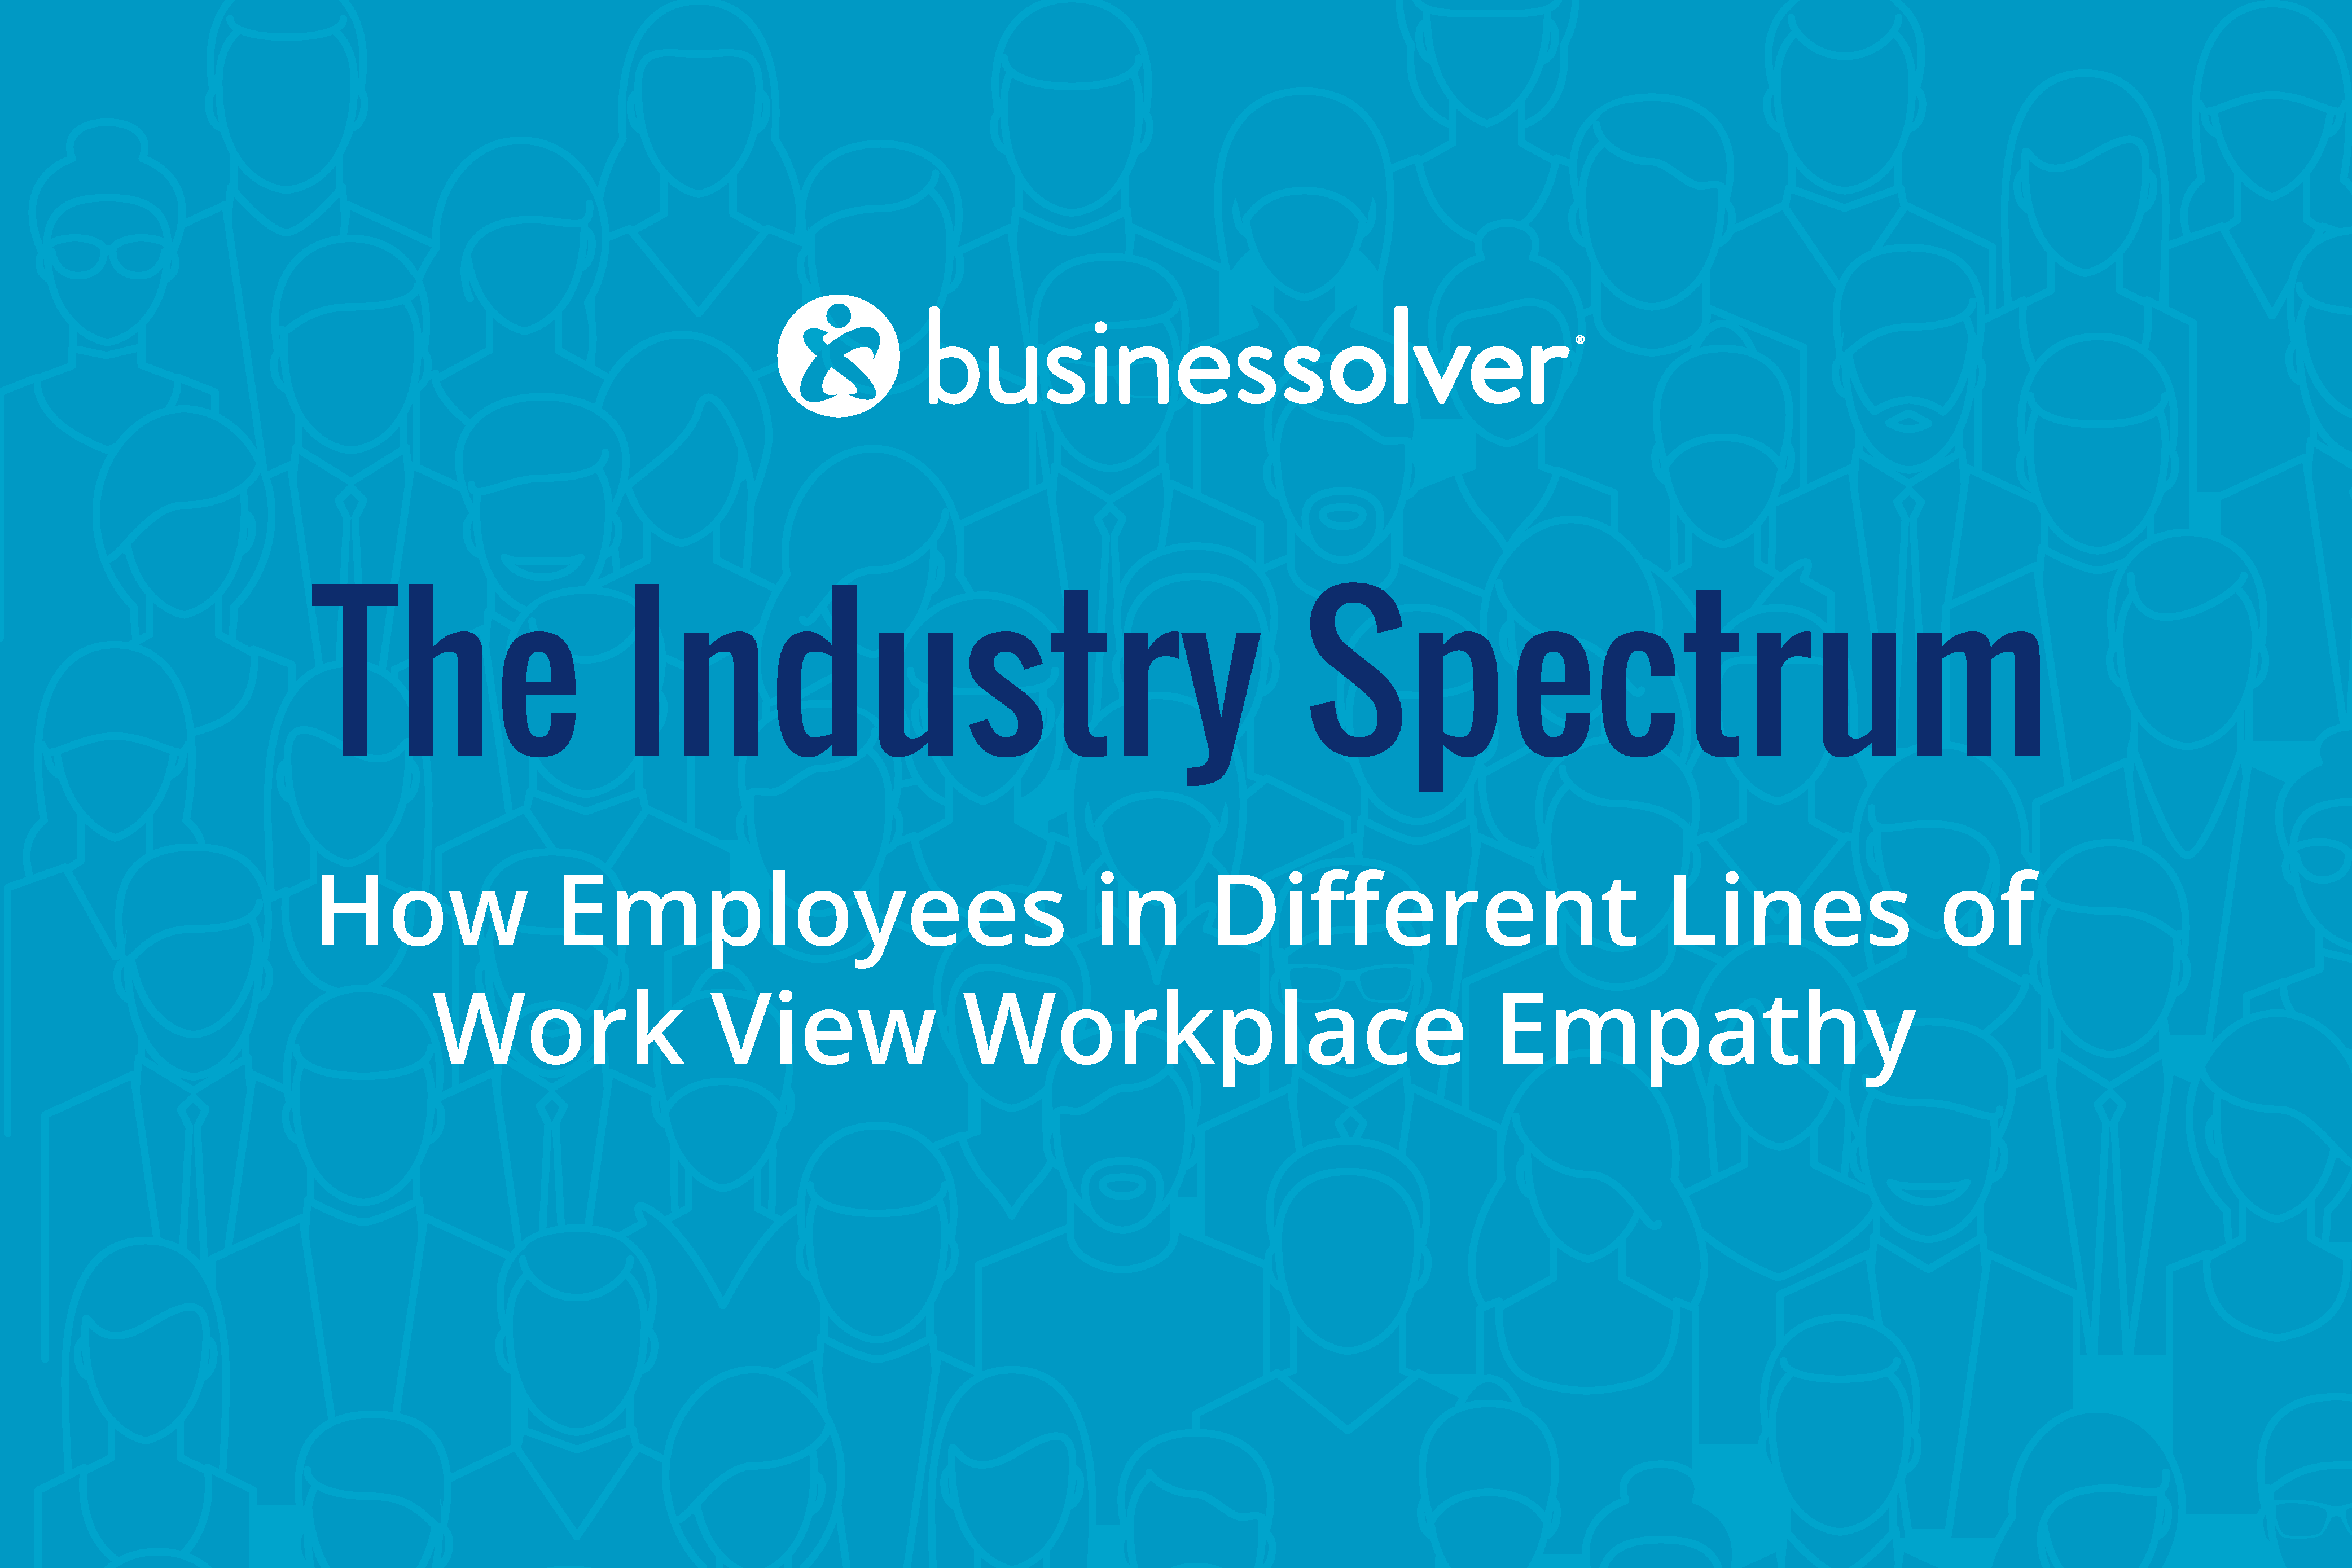 empathy-the-industry-spectrum-demo-cuts-resource-image